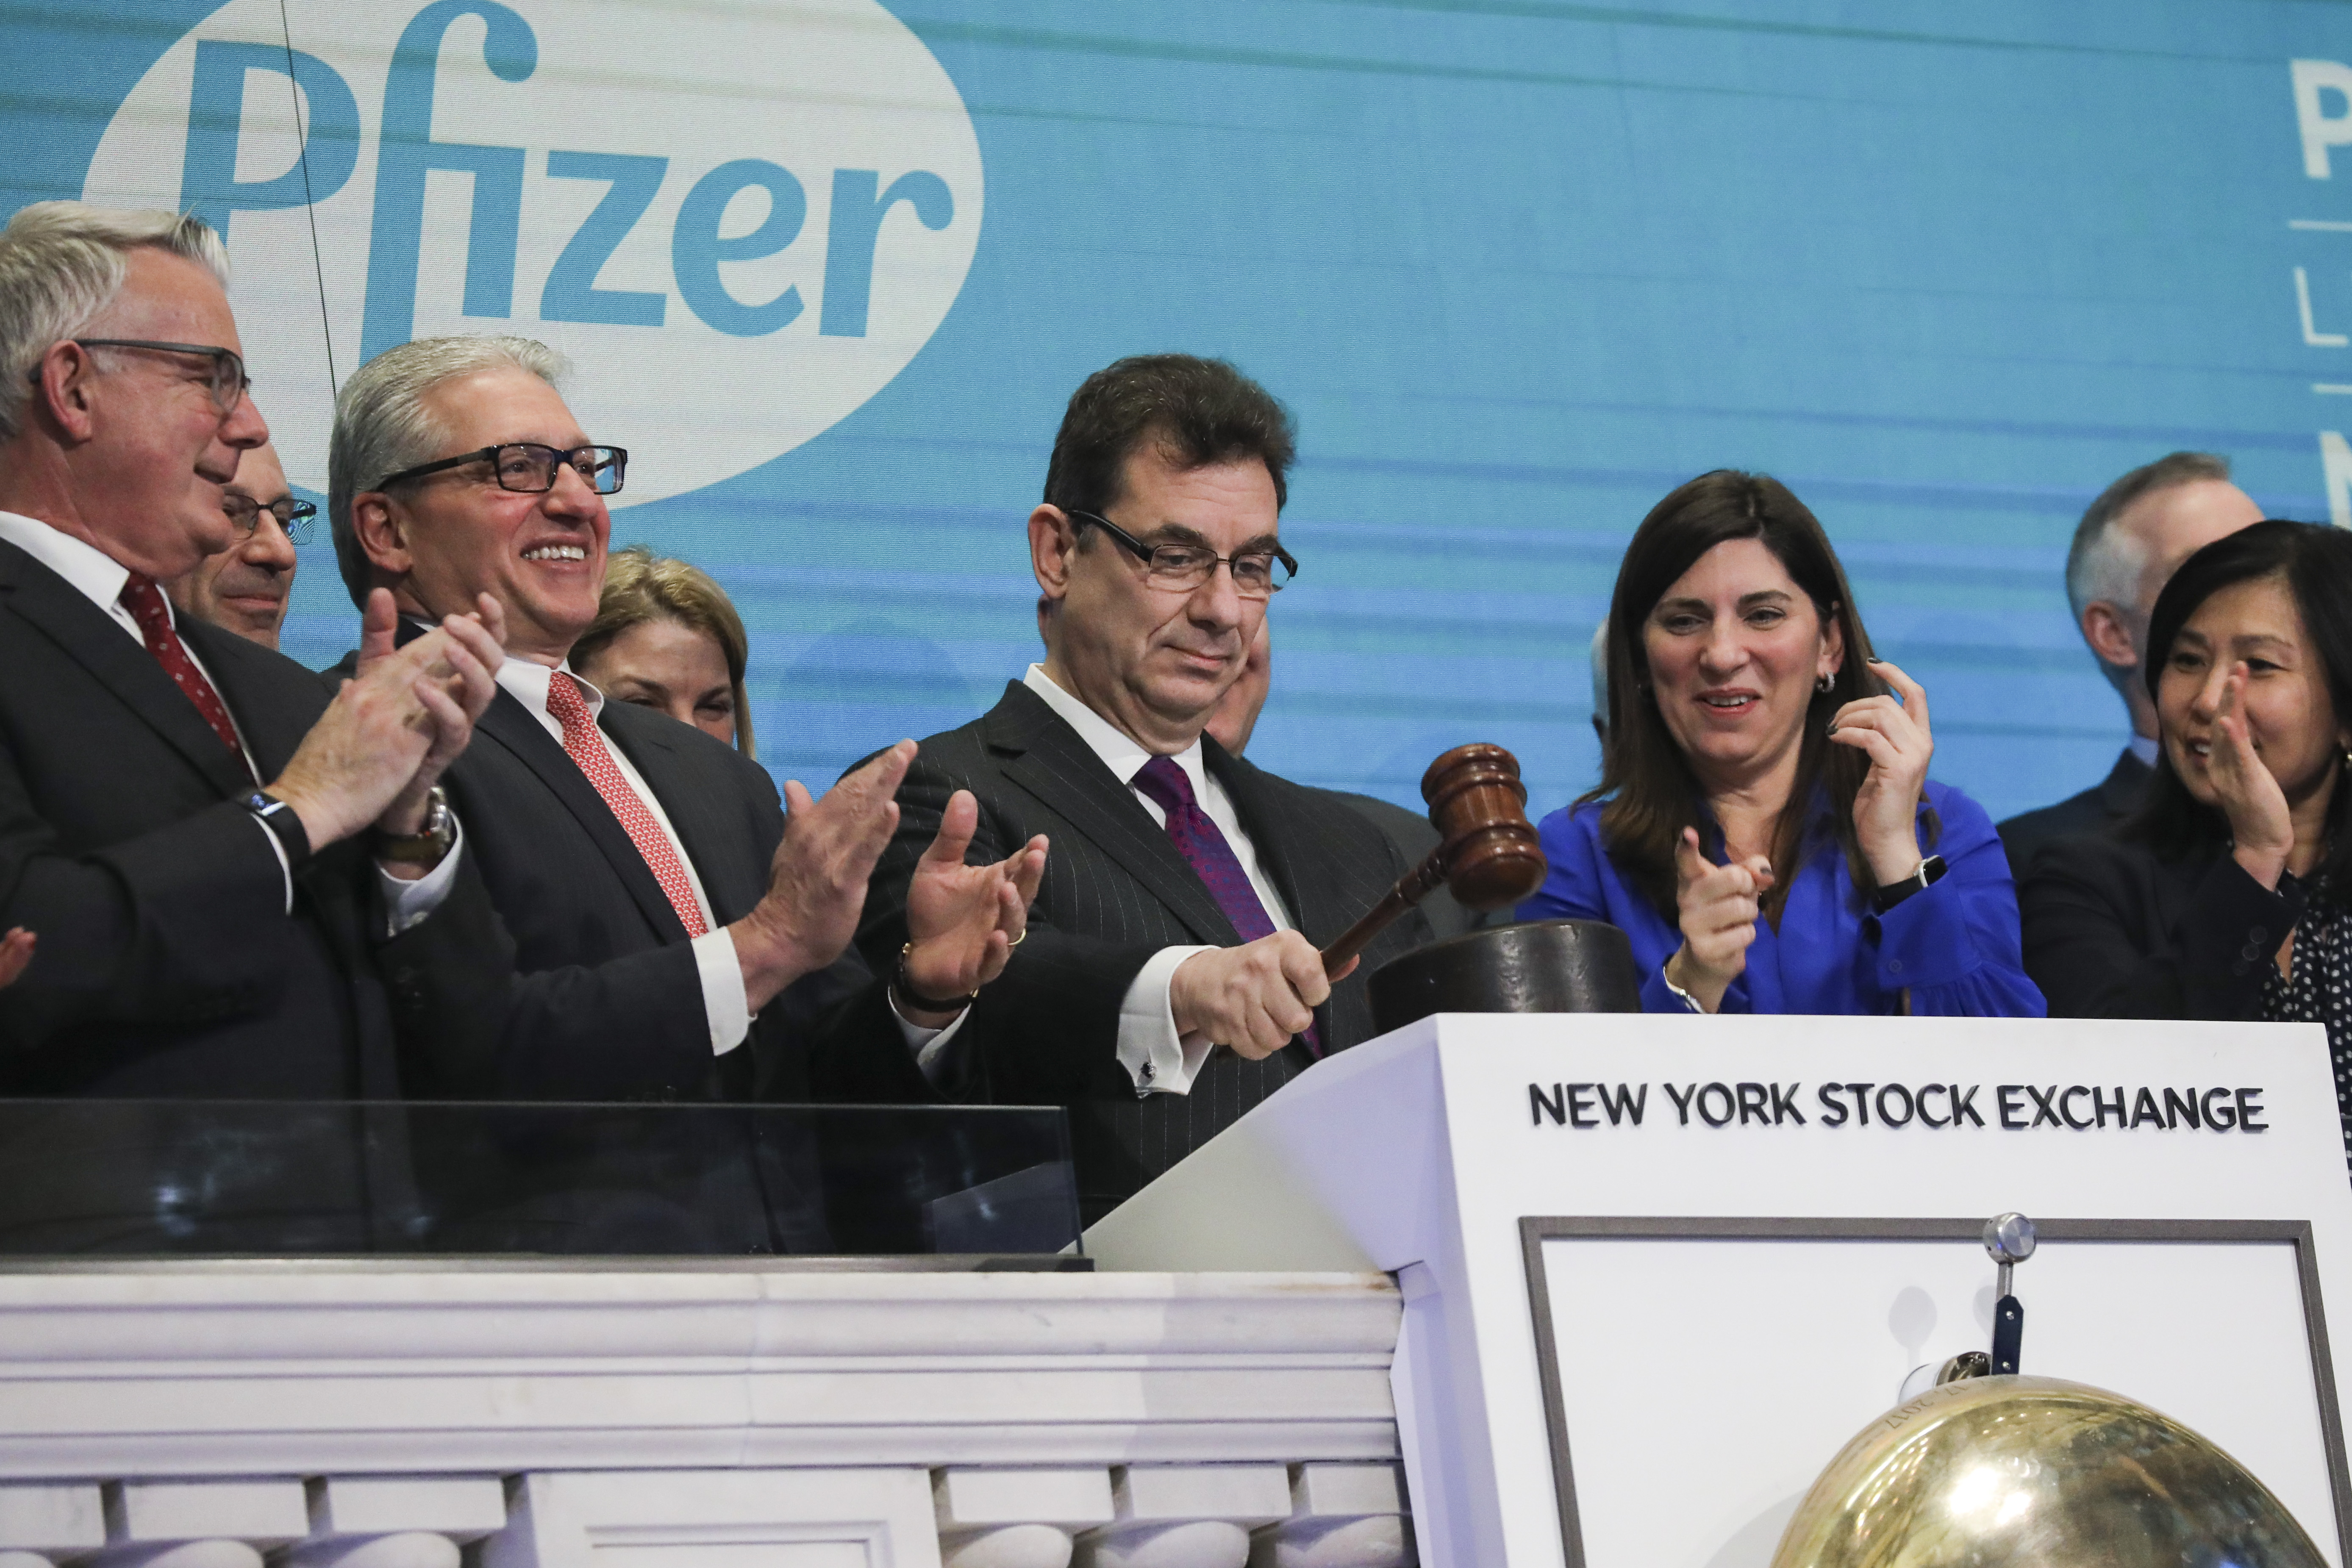 Albert Bourla, chief executive officer of Pfizer pharmaceutical company, bangs a gavel after ringing the closing bell at the New York Stock Exchange (NYSE) on Thursday afternoon, January 17, 2019 in New York City.